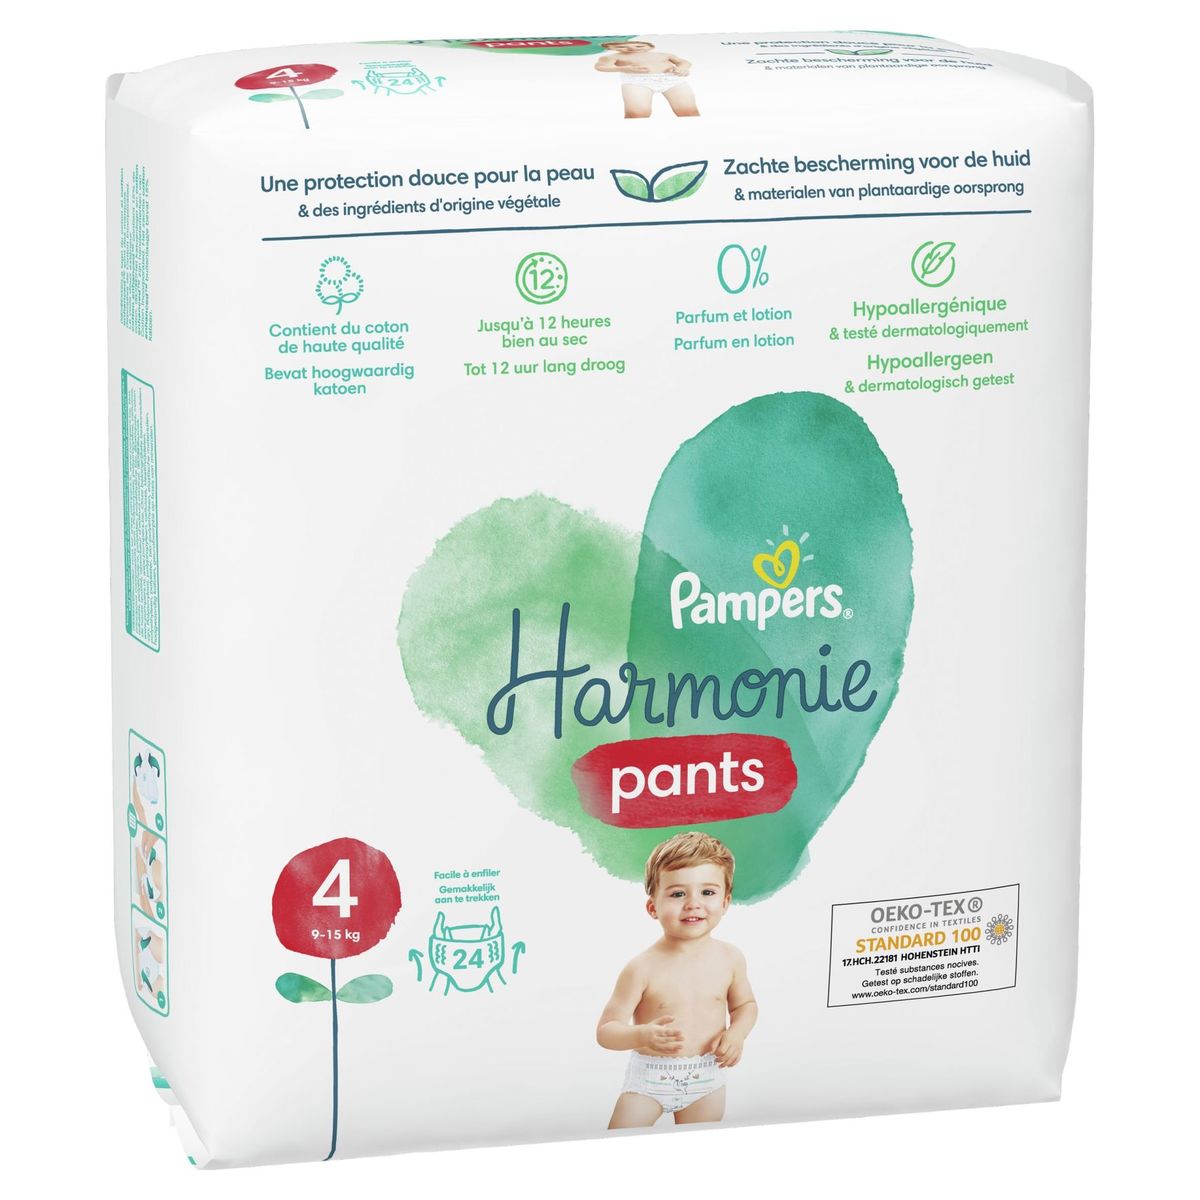 Pampers Harmonie Pants Couches-Culottes T4, 24 Culottes, 9kg-15kg